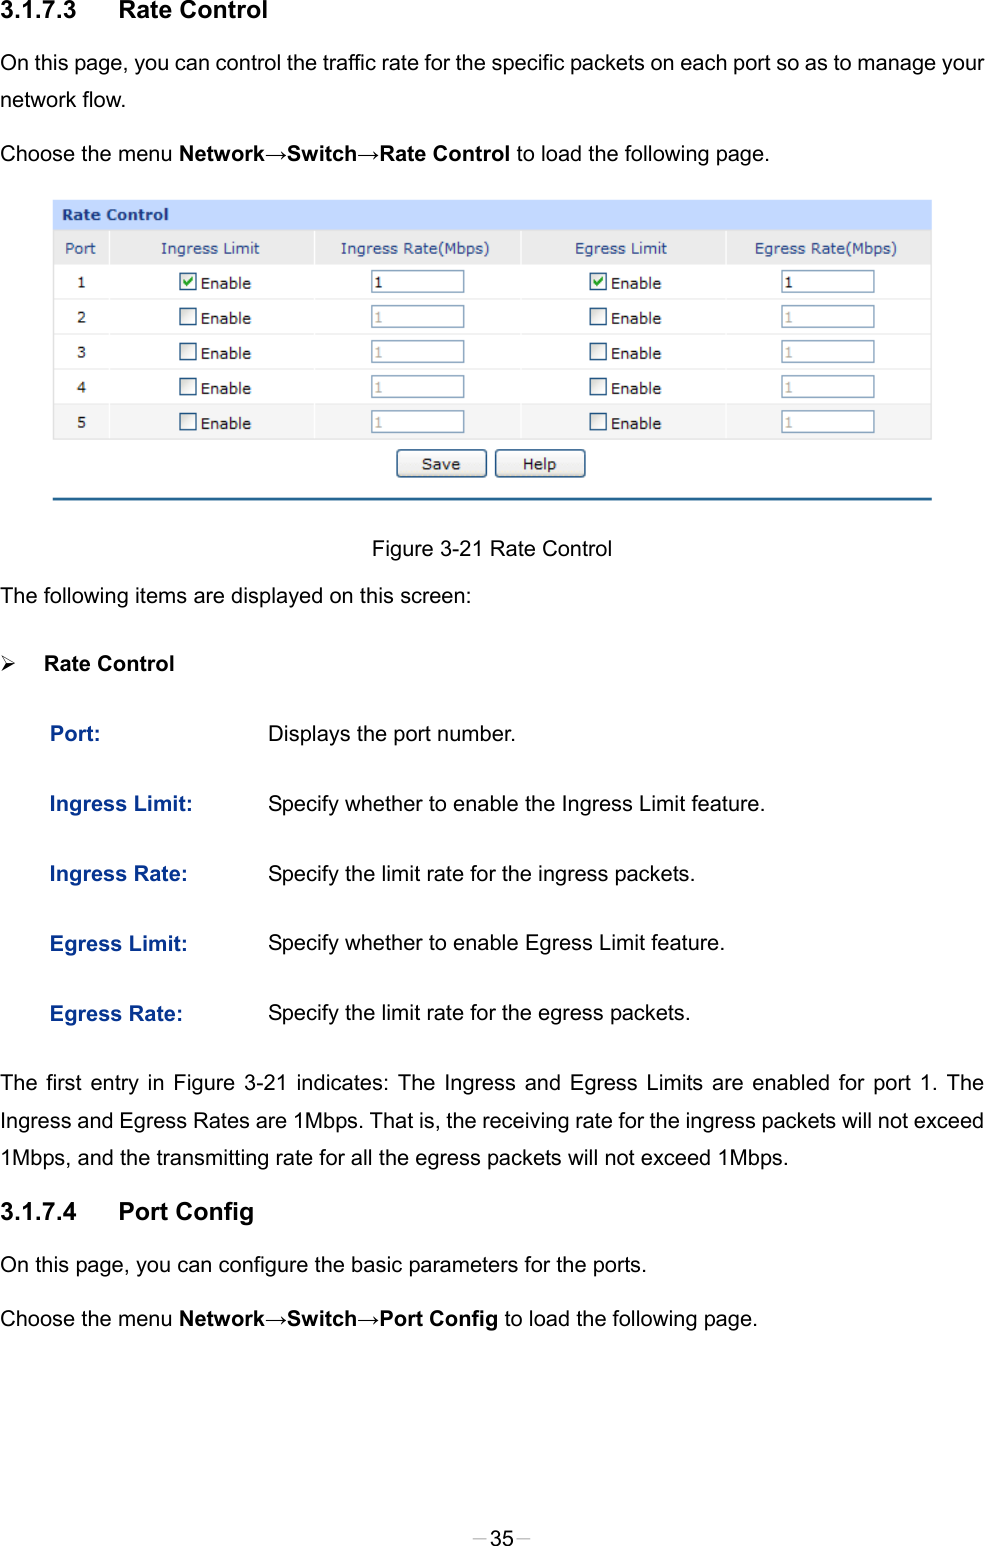  3.1.7.3 Rate Control On this page, you can control the traffic rate for the specific packets on each port so as to manage your network flow. Choose the menu Network→Switch→Rate Control to load the following page.  Figure 3-21 Rate Control The following items are displayed on this screen:  Rate Control Port:  Displays the port number.   Ingress Limit:  Specify whether to enable the Ingress Limit feature. Ingress Rate:  Specify the limit rate for the ingress packets. Egress Limit:  Specify whether to enable Egress Limit feature. Egress Rate:  Specify the limit rate for the egress packets. The first entry in Figure  3-21 indicates: The Ingress and Egress Limits are enabled for port 1. The Ingress and Egress Rates are 1Mbps. That is, the receiving rate for the ingress packets will not exceed 1Mbps, and the transmitting rate for all the egress packets will not exceed 1Mbps.   3.1.7.4 Port Config On this page, you can configure the basic parameters for the ports. Choose the menu Network→Switch→Port Config to load the following page. -35- 